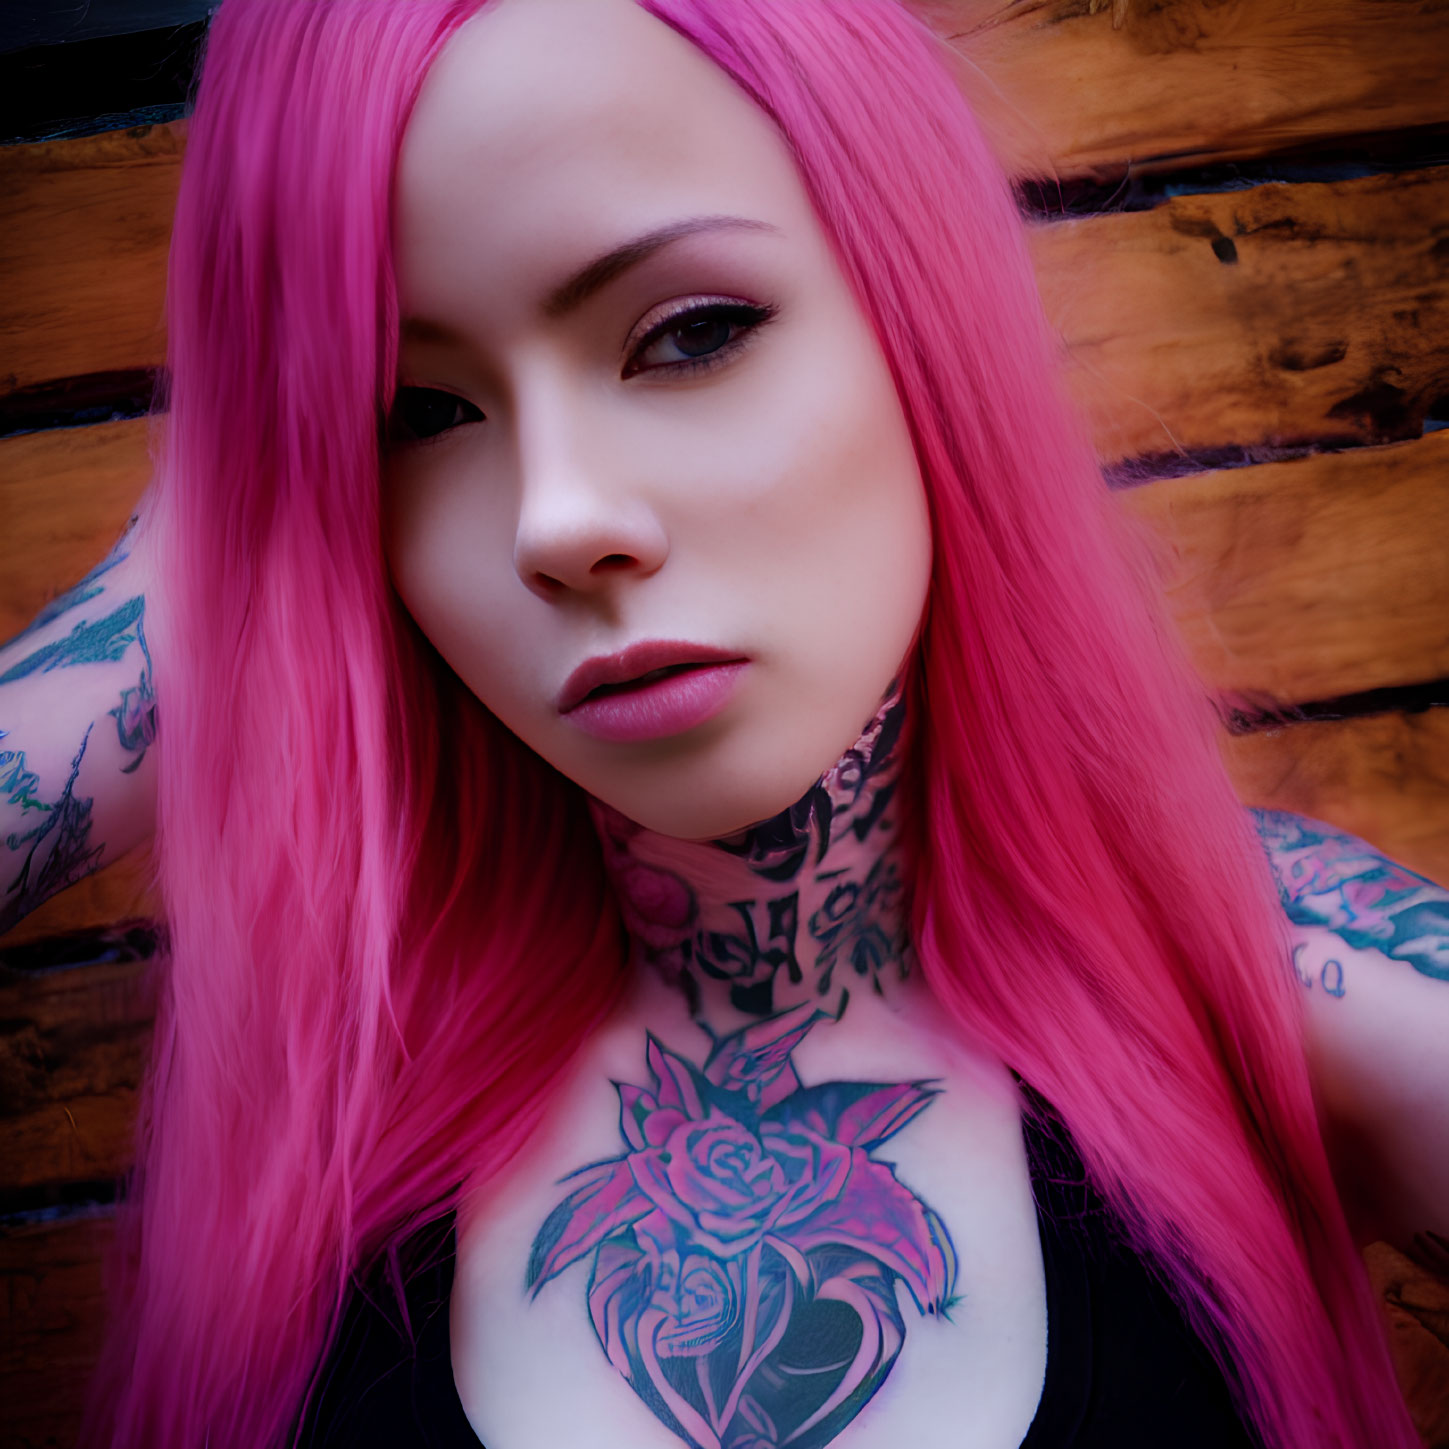 Vivid pink hair and tattoos on neck and arms against wooden backdrop